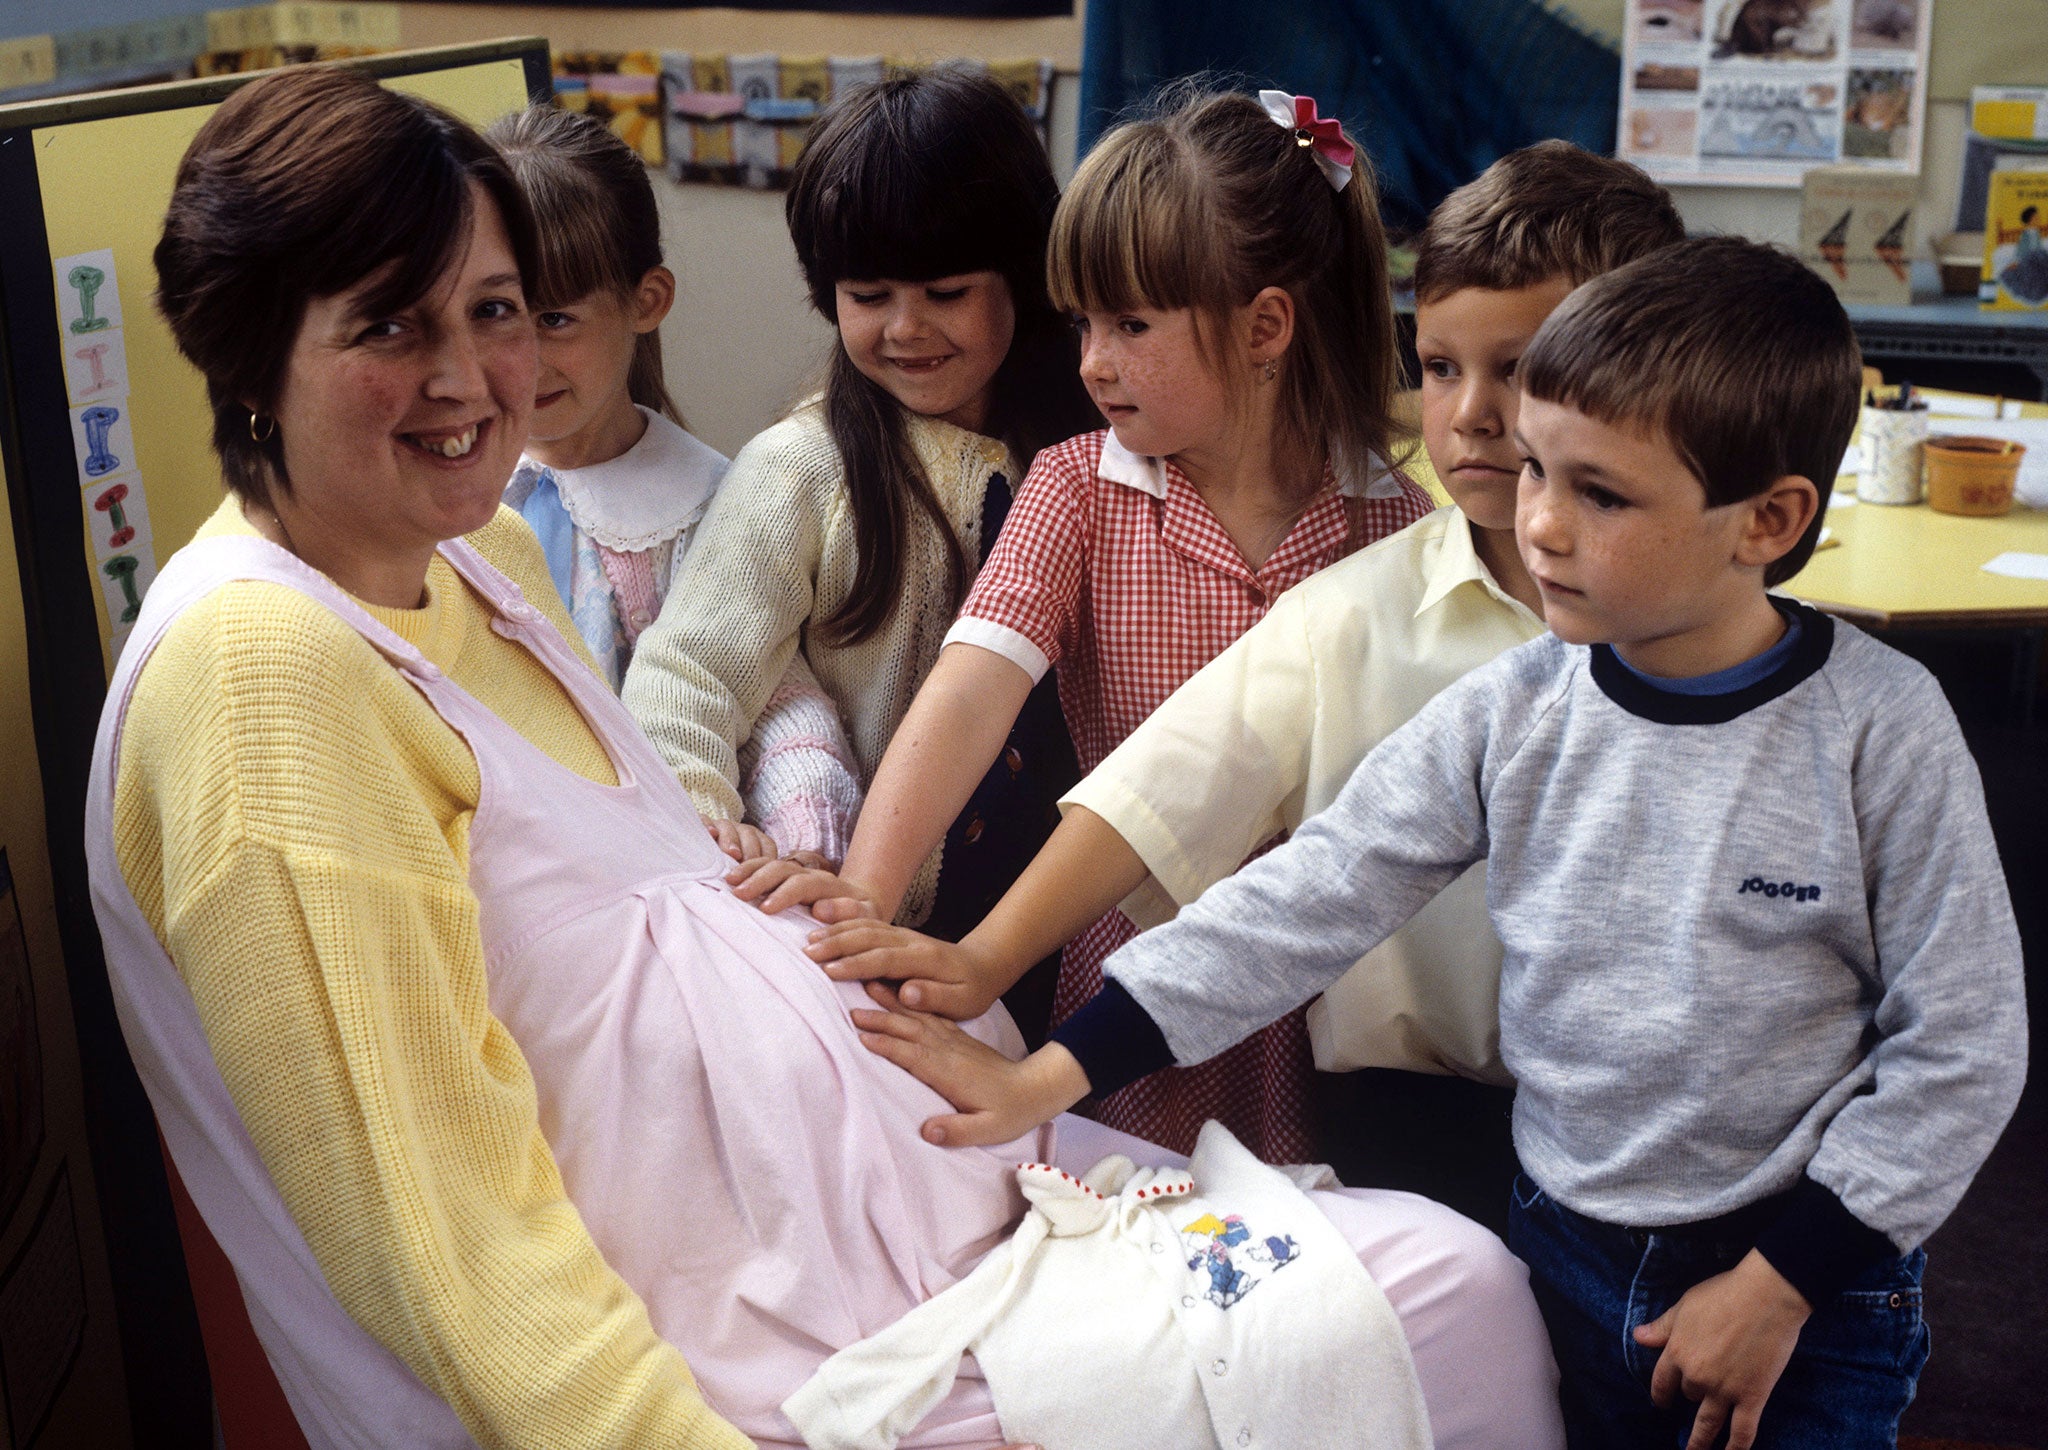 A group of primary school children learn about where babies come from